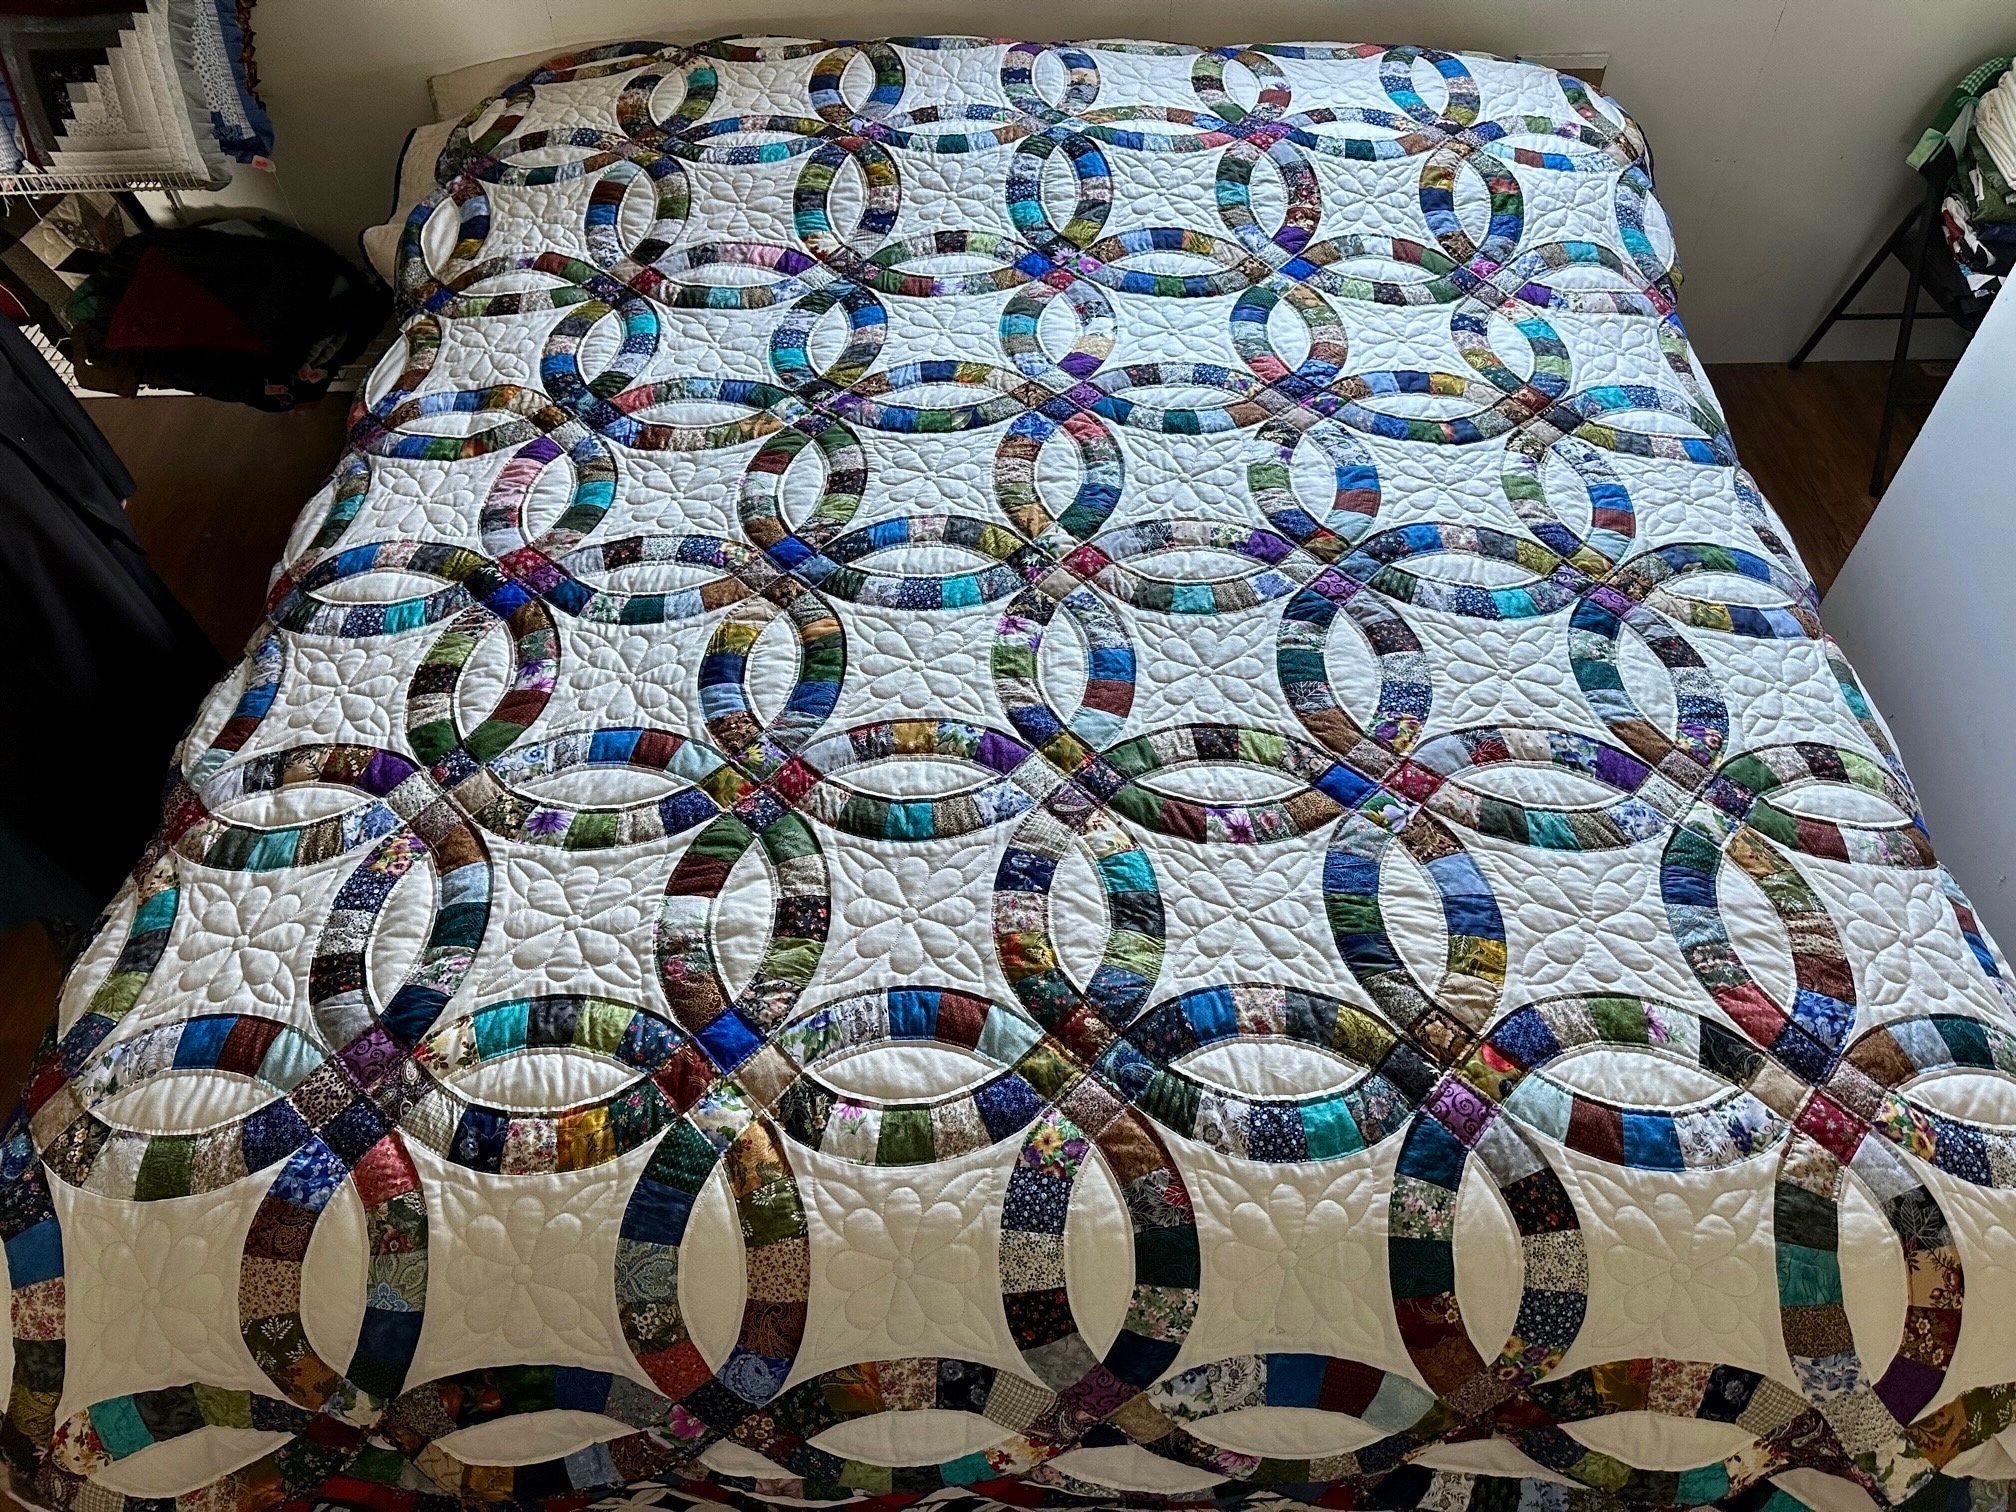 Double Wedding Ring Quilts — The Quilt Surrounded by Myths – Quilts, Quips,  and other Nearsighted Adventures